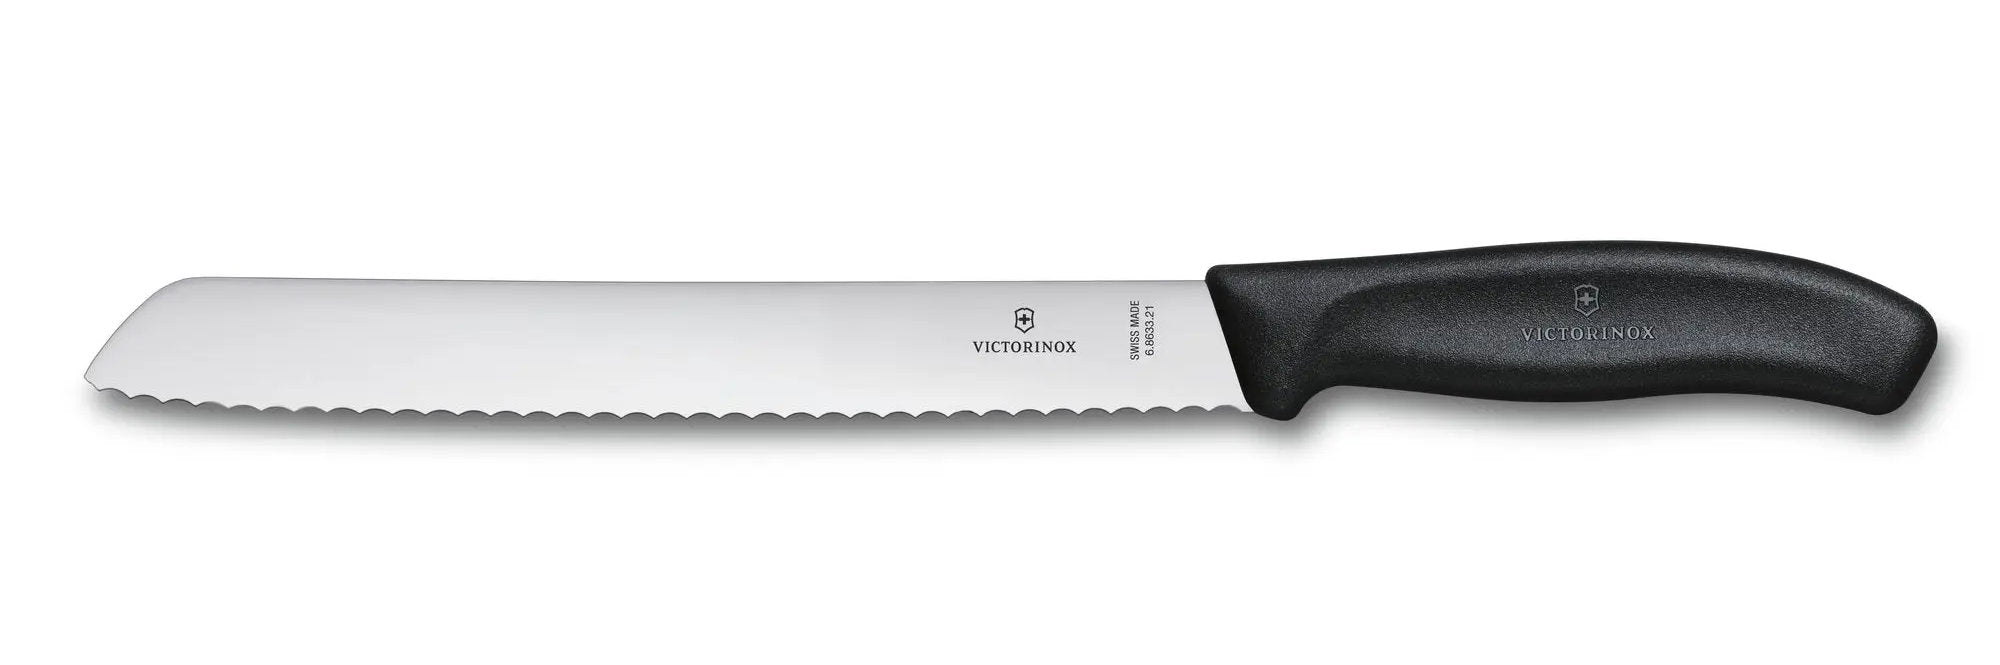 Victorinox Wood Bread and Pastry 8.5-Inch Knife